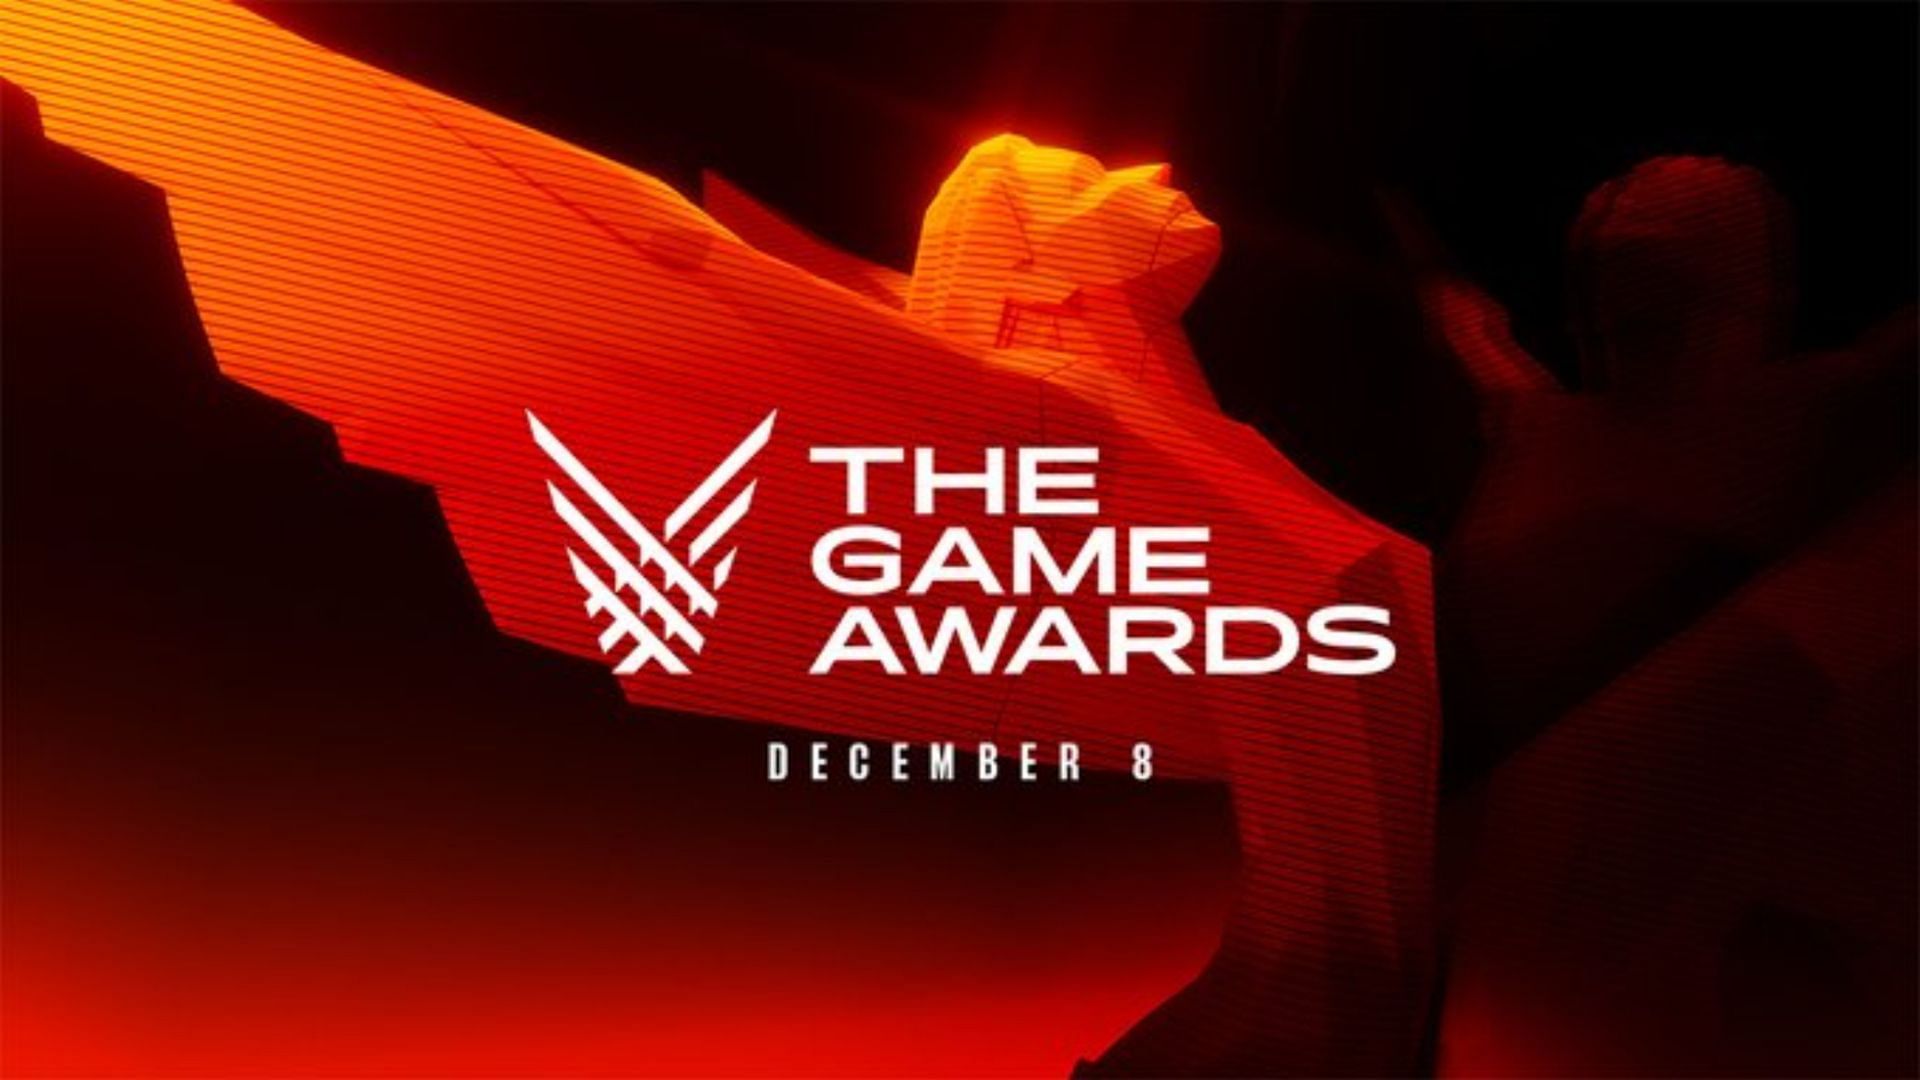 The Game Awards is on December 8 (Image via The Game Awards 2022)